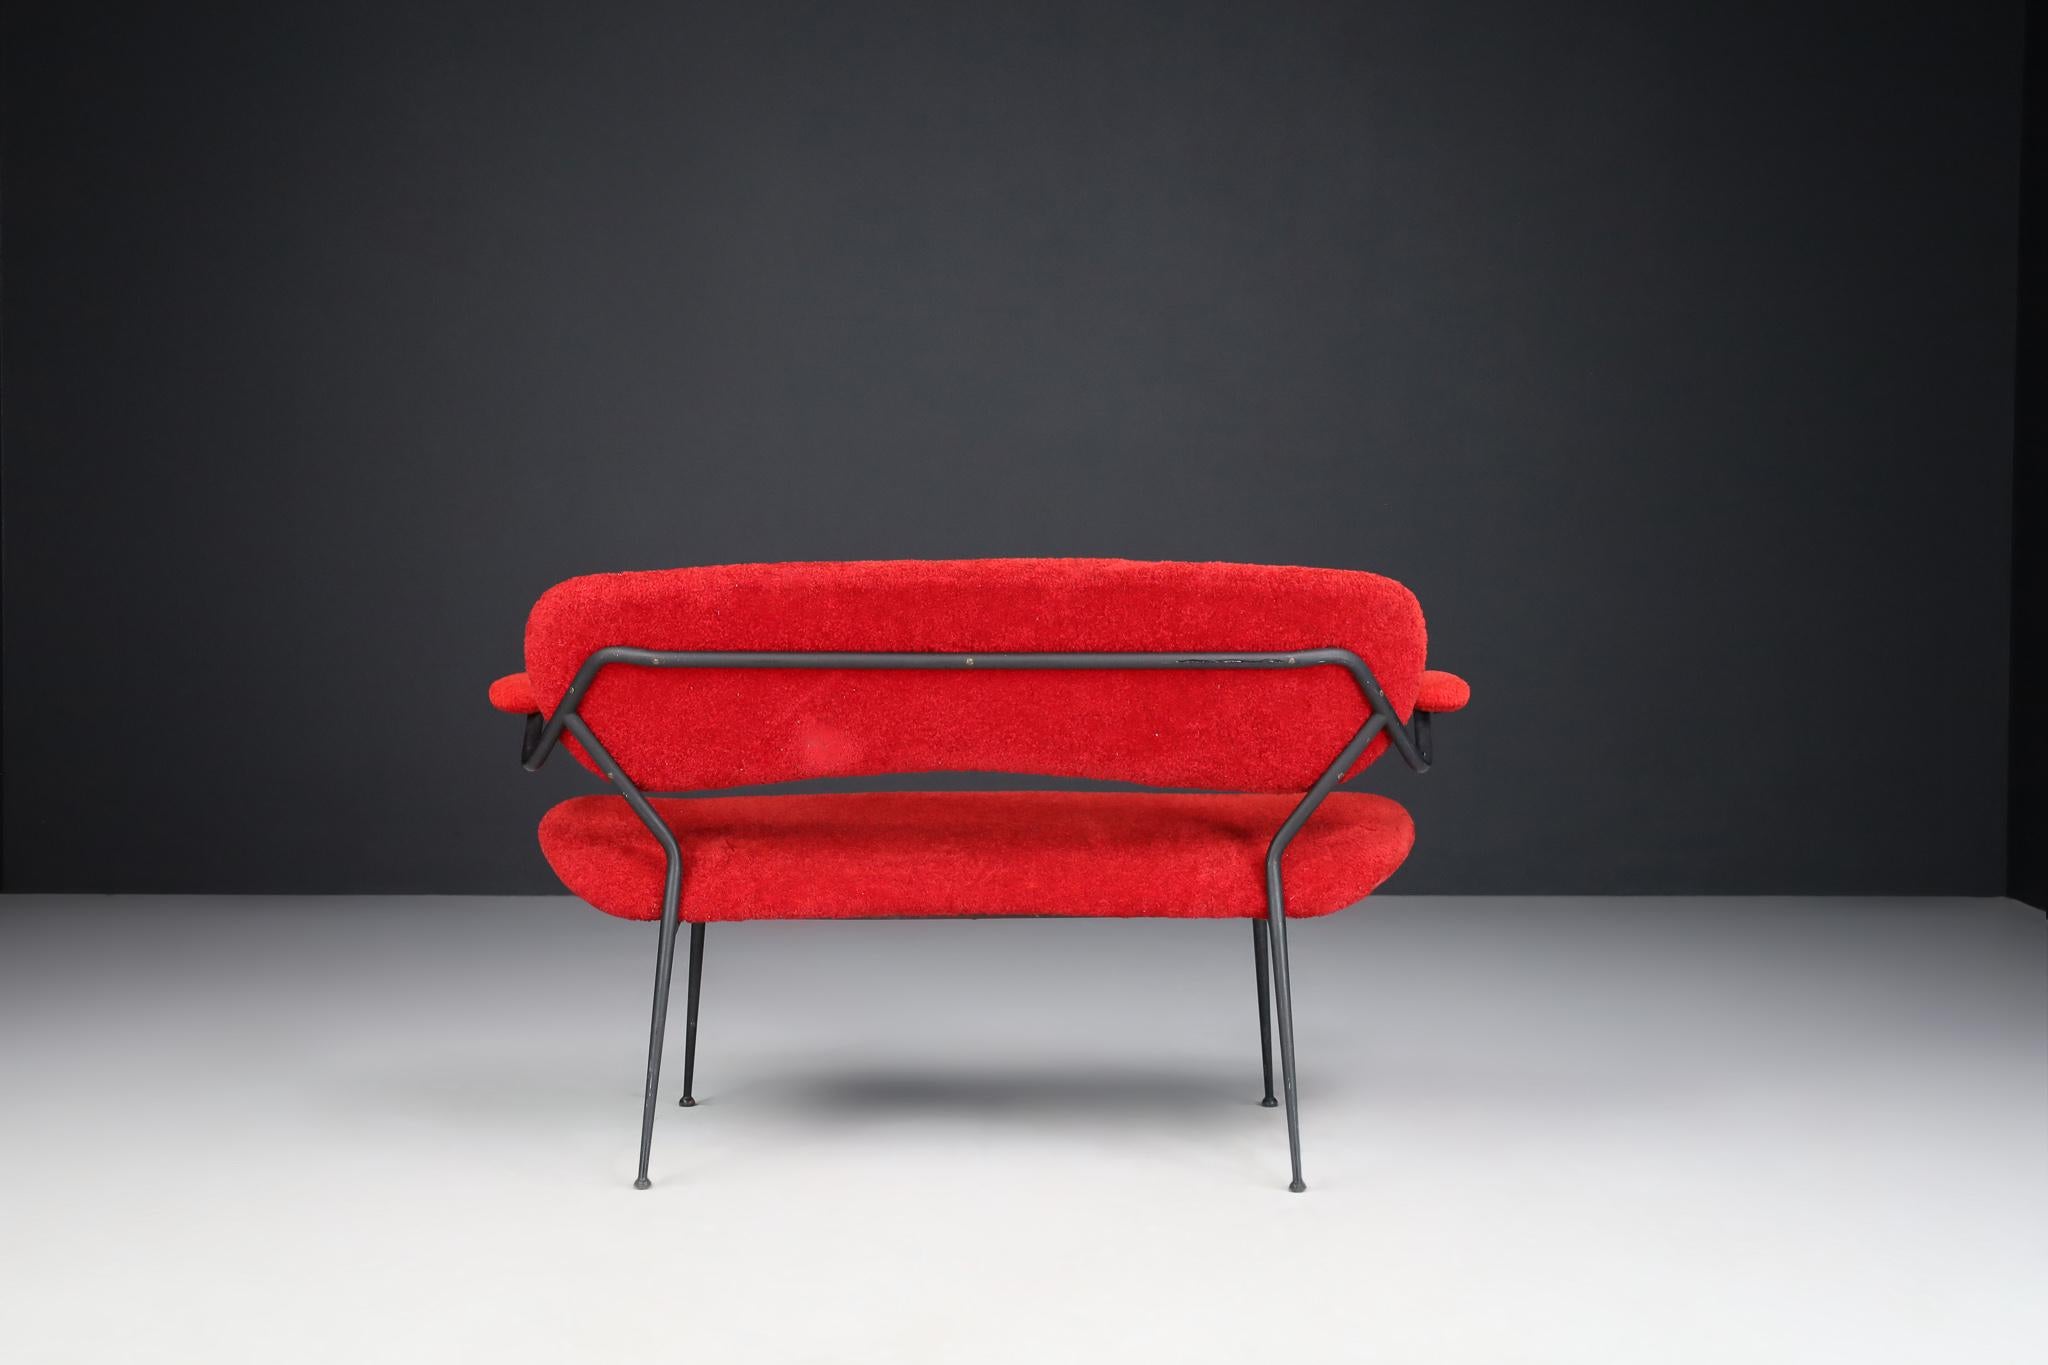 Fabric Red Mid-Century Modern Sofa/Bench by Gastone Rinaldi, Italy, 1960s For Sale